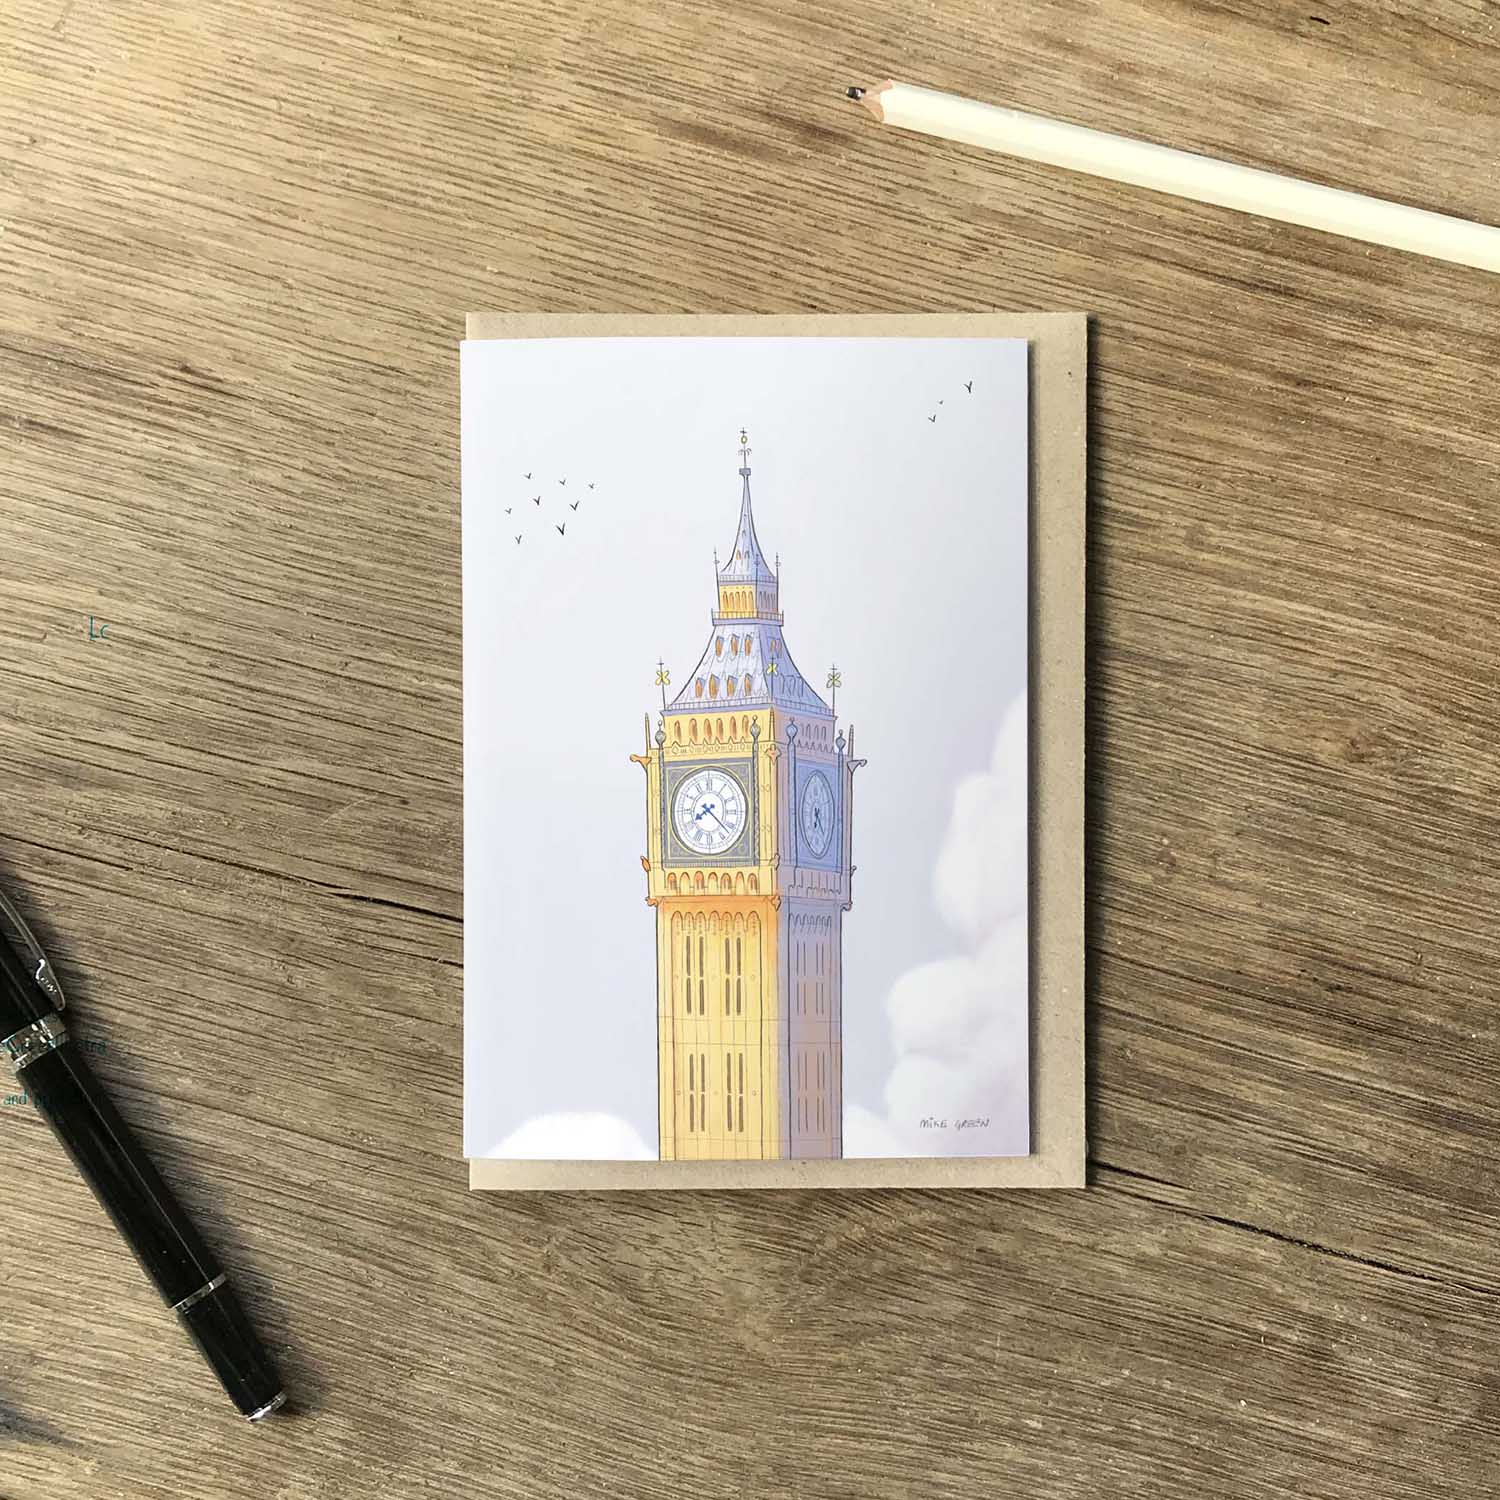 London's Big Ben beautifully illustrated on a greeting card by mike green illustration.